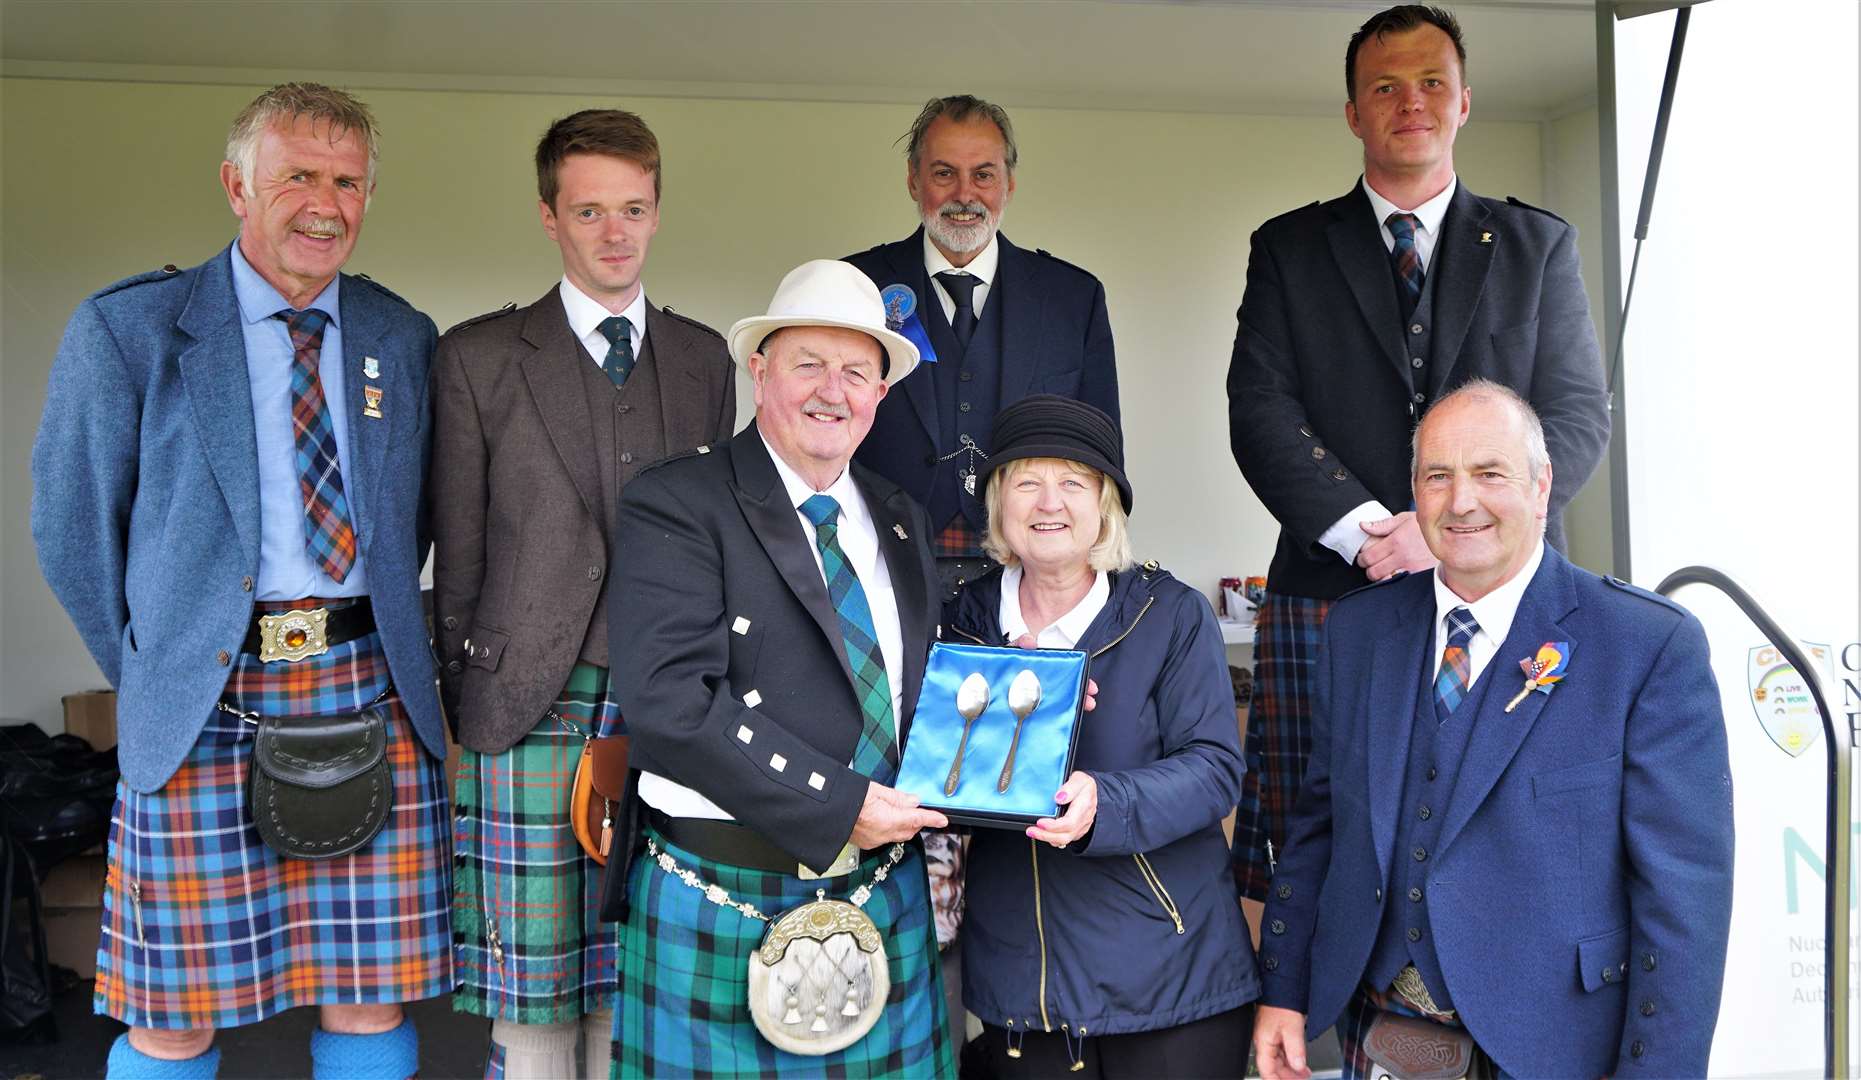 Compere at the event Willie Mackay was delighted to receive an engraved set of silver spoons. Picture: DGS